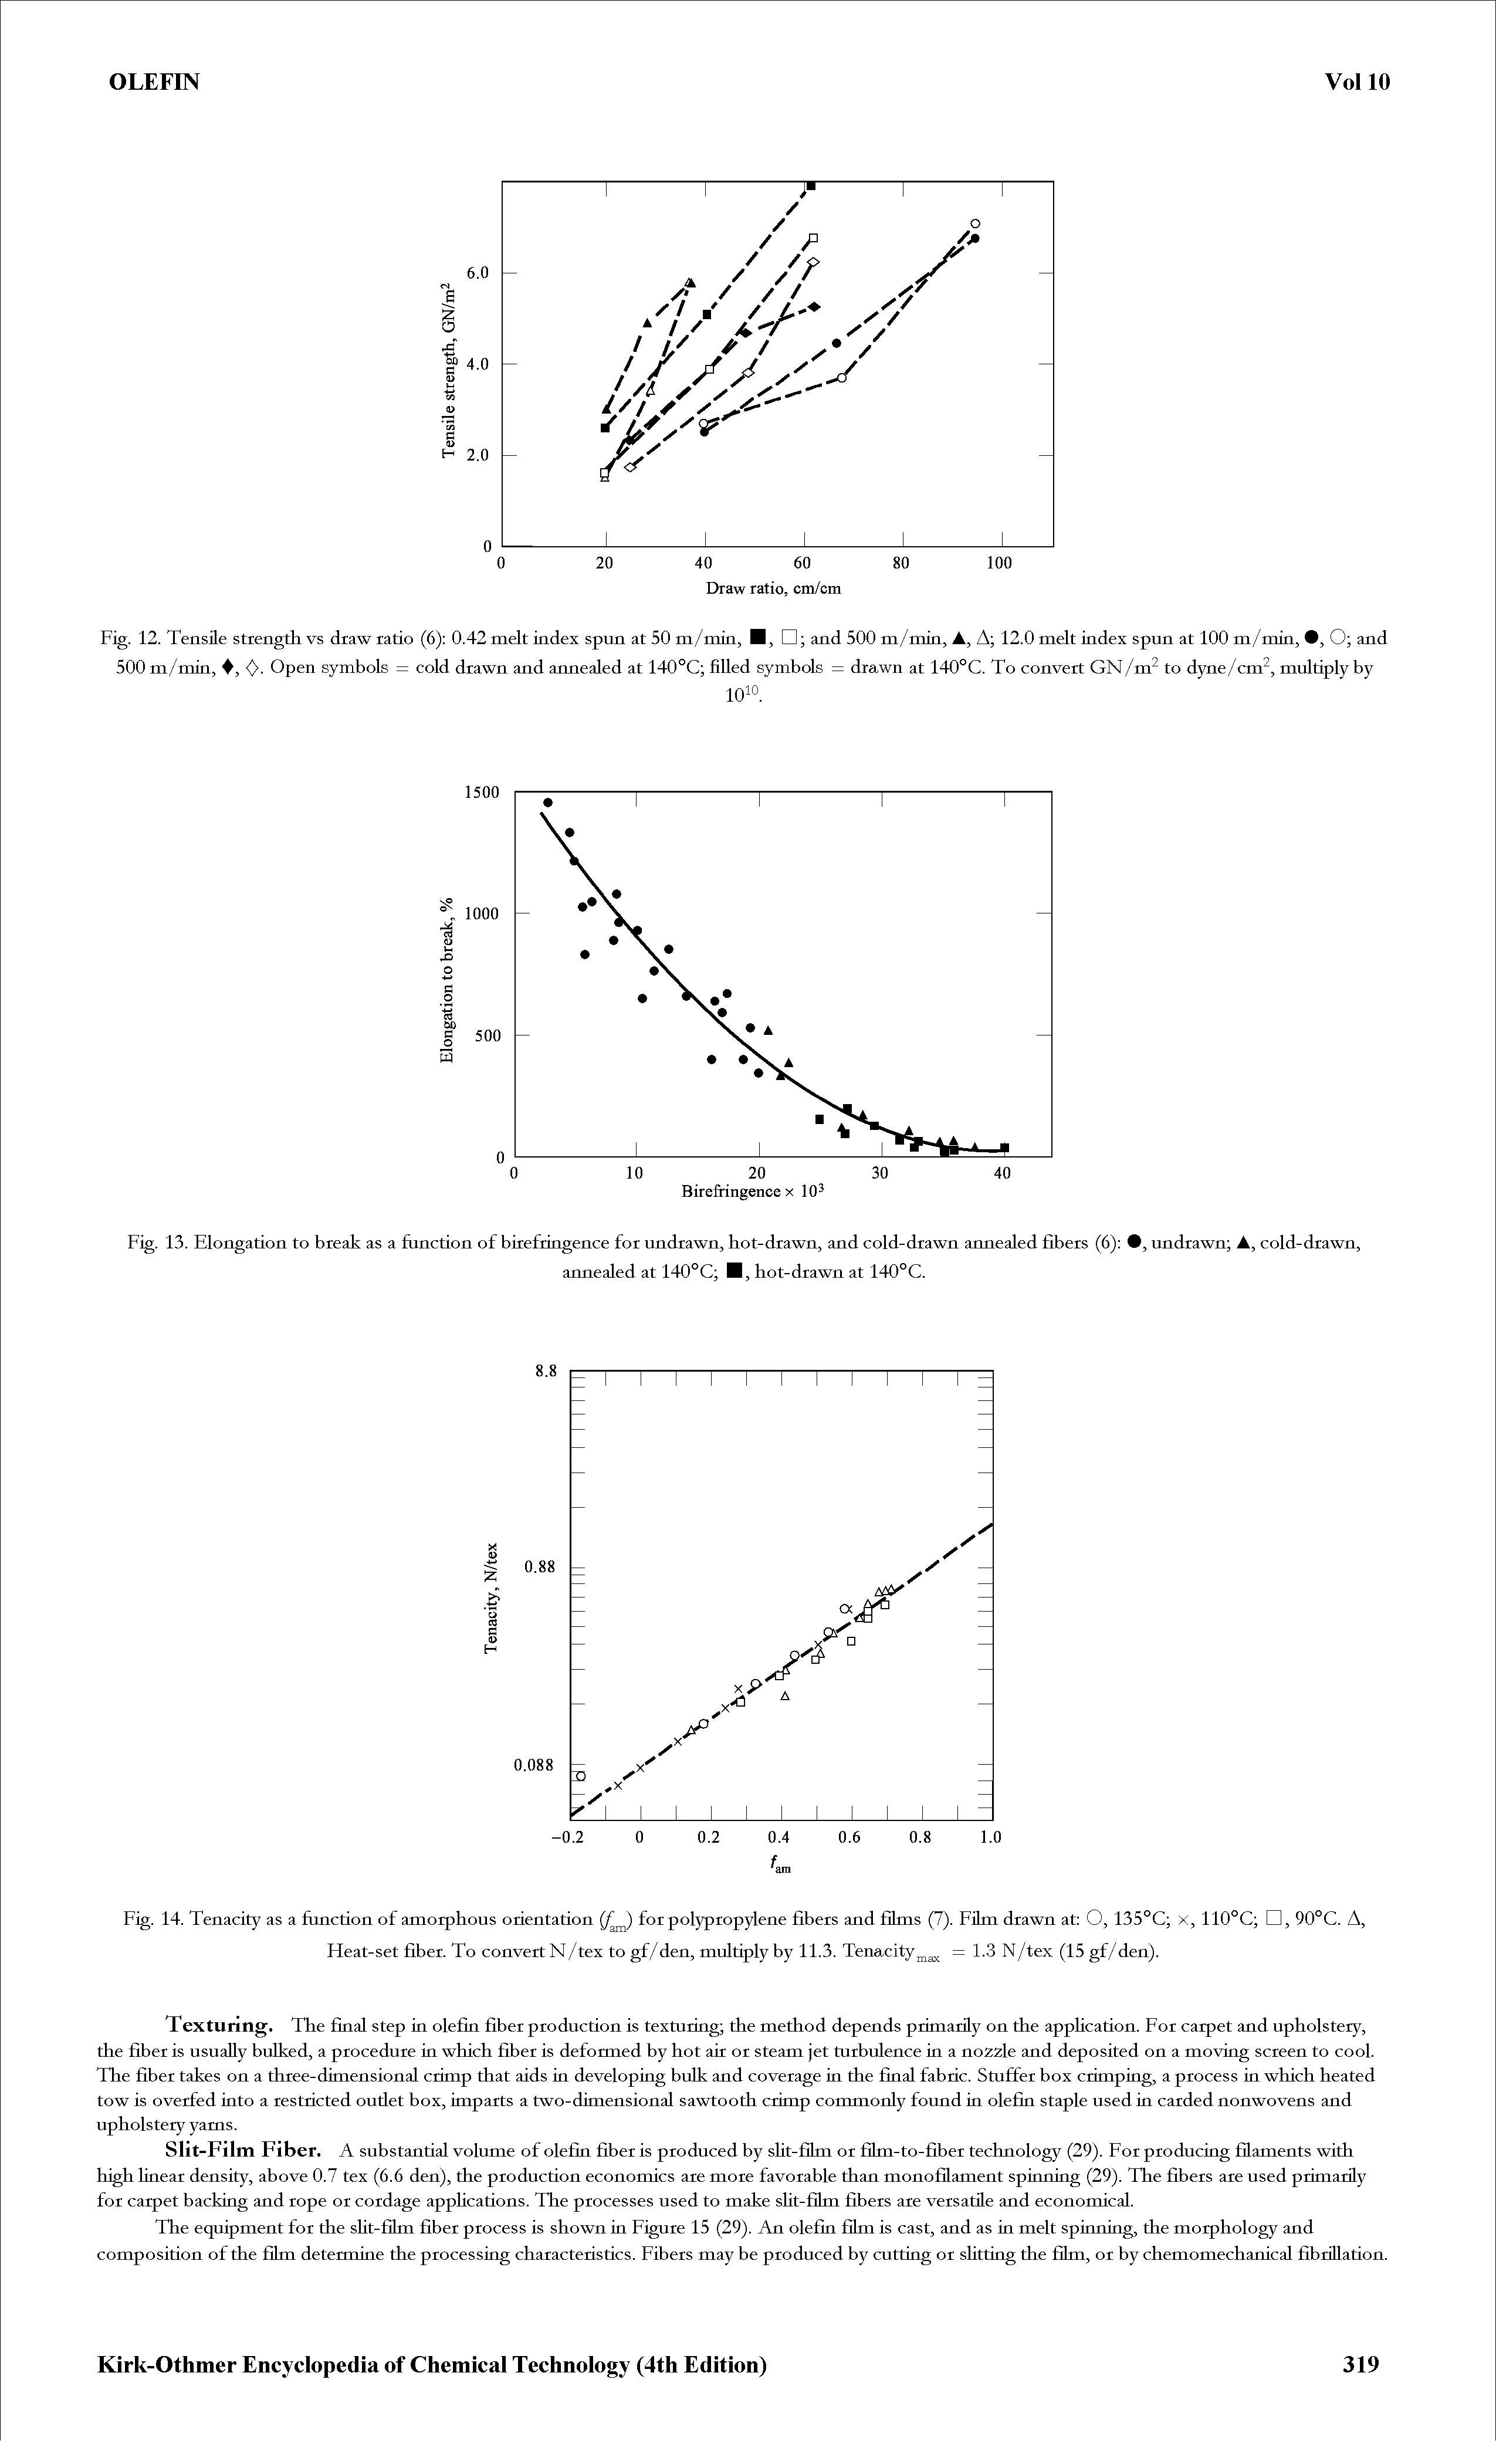 Fig. 12. Tensile strength vs draw ratio (6) 0.42 melt index spun at 50 m /min, B, and 500 m /min, A, A 12.0 melt index spun at 100 m /min, , O and 500 m /min, , <). Open symbols = cold drawn and annealed at 140°C filled symbols = drawn at 140°C. To convert GN/m to dyne/cm, multiply by...